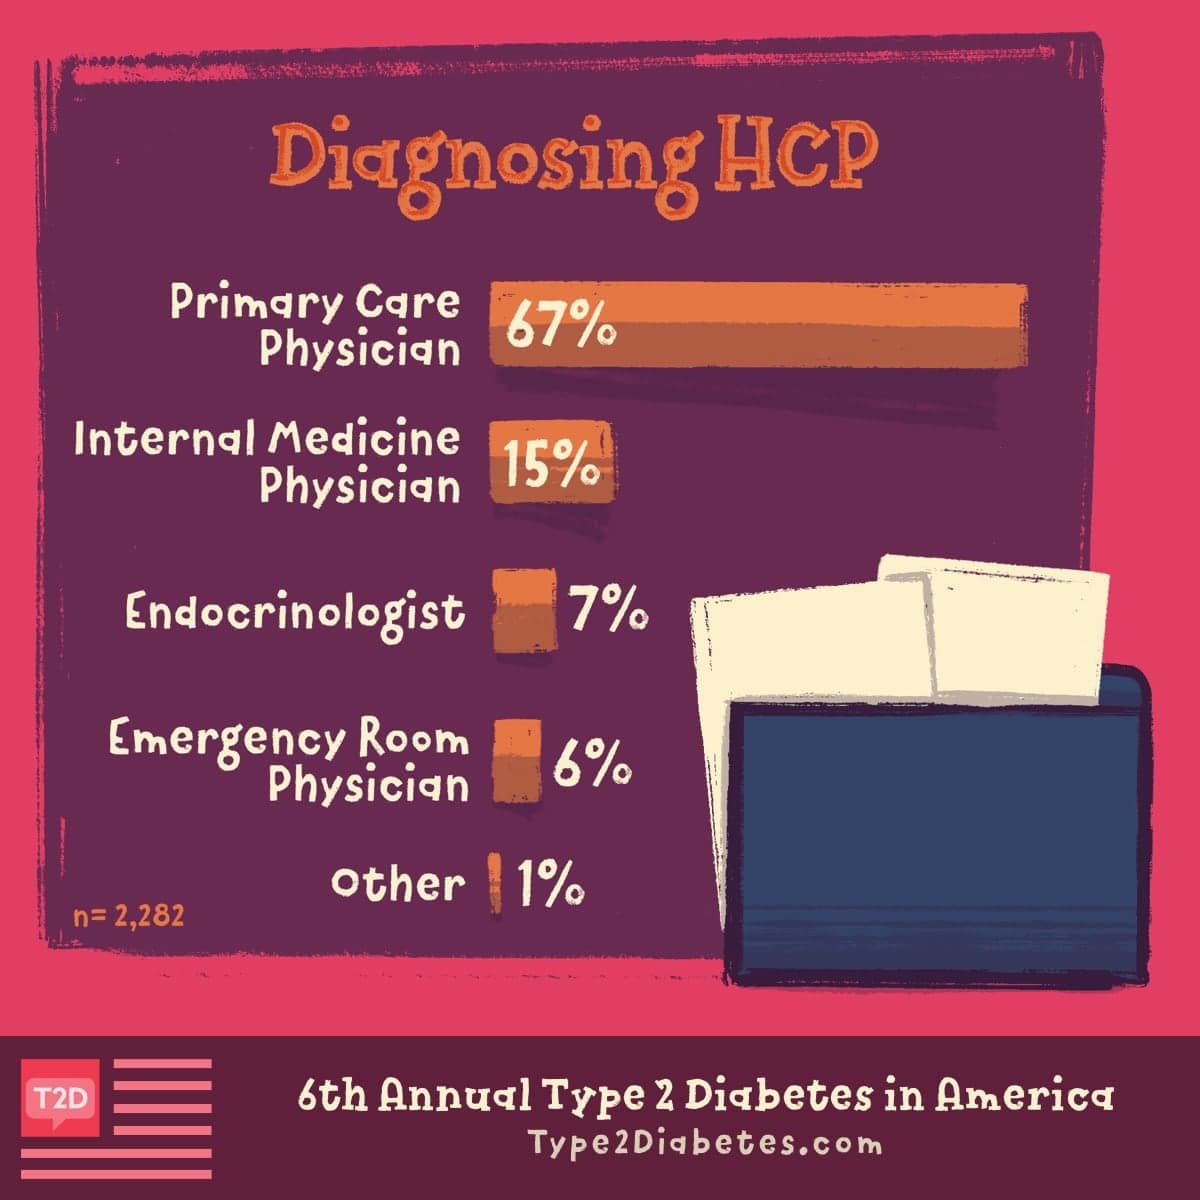 The majority of survey respondents (67%) were diagnosed by their primary care physician.